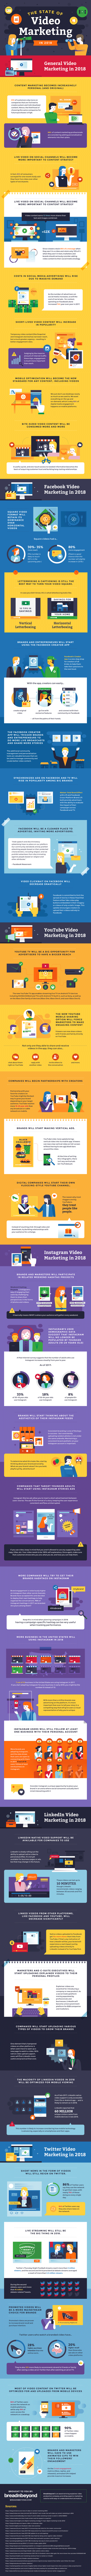 The State of Video Marketing in 2018 [INFOGRAPHIC]